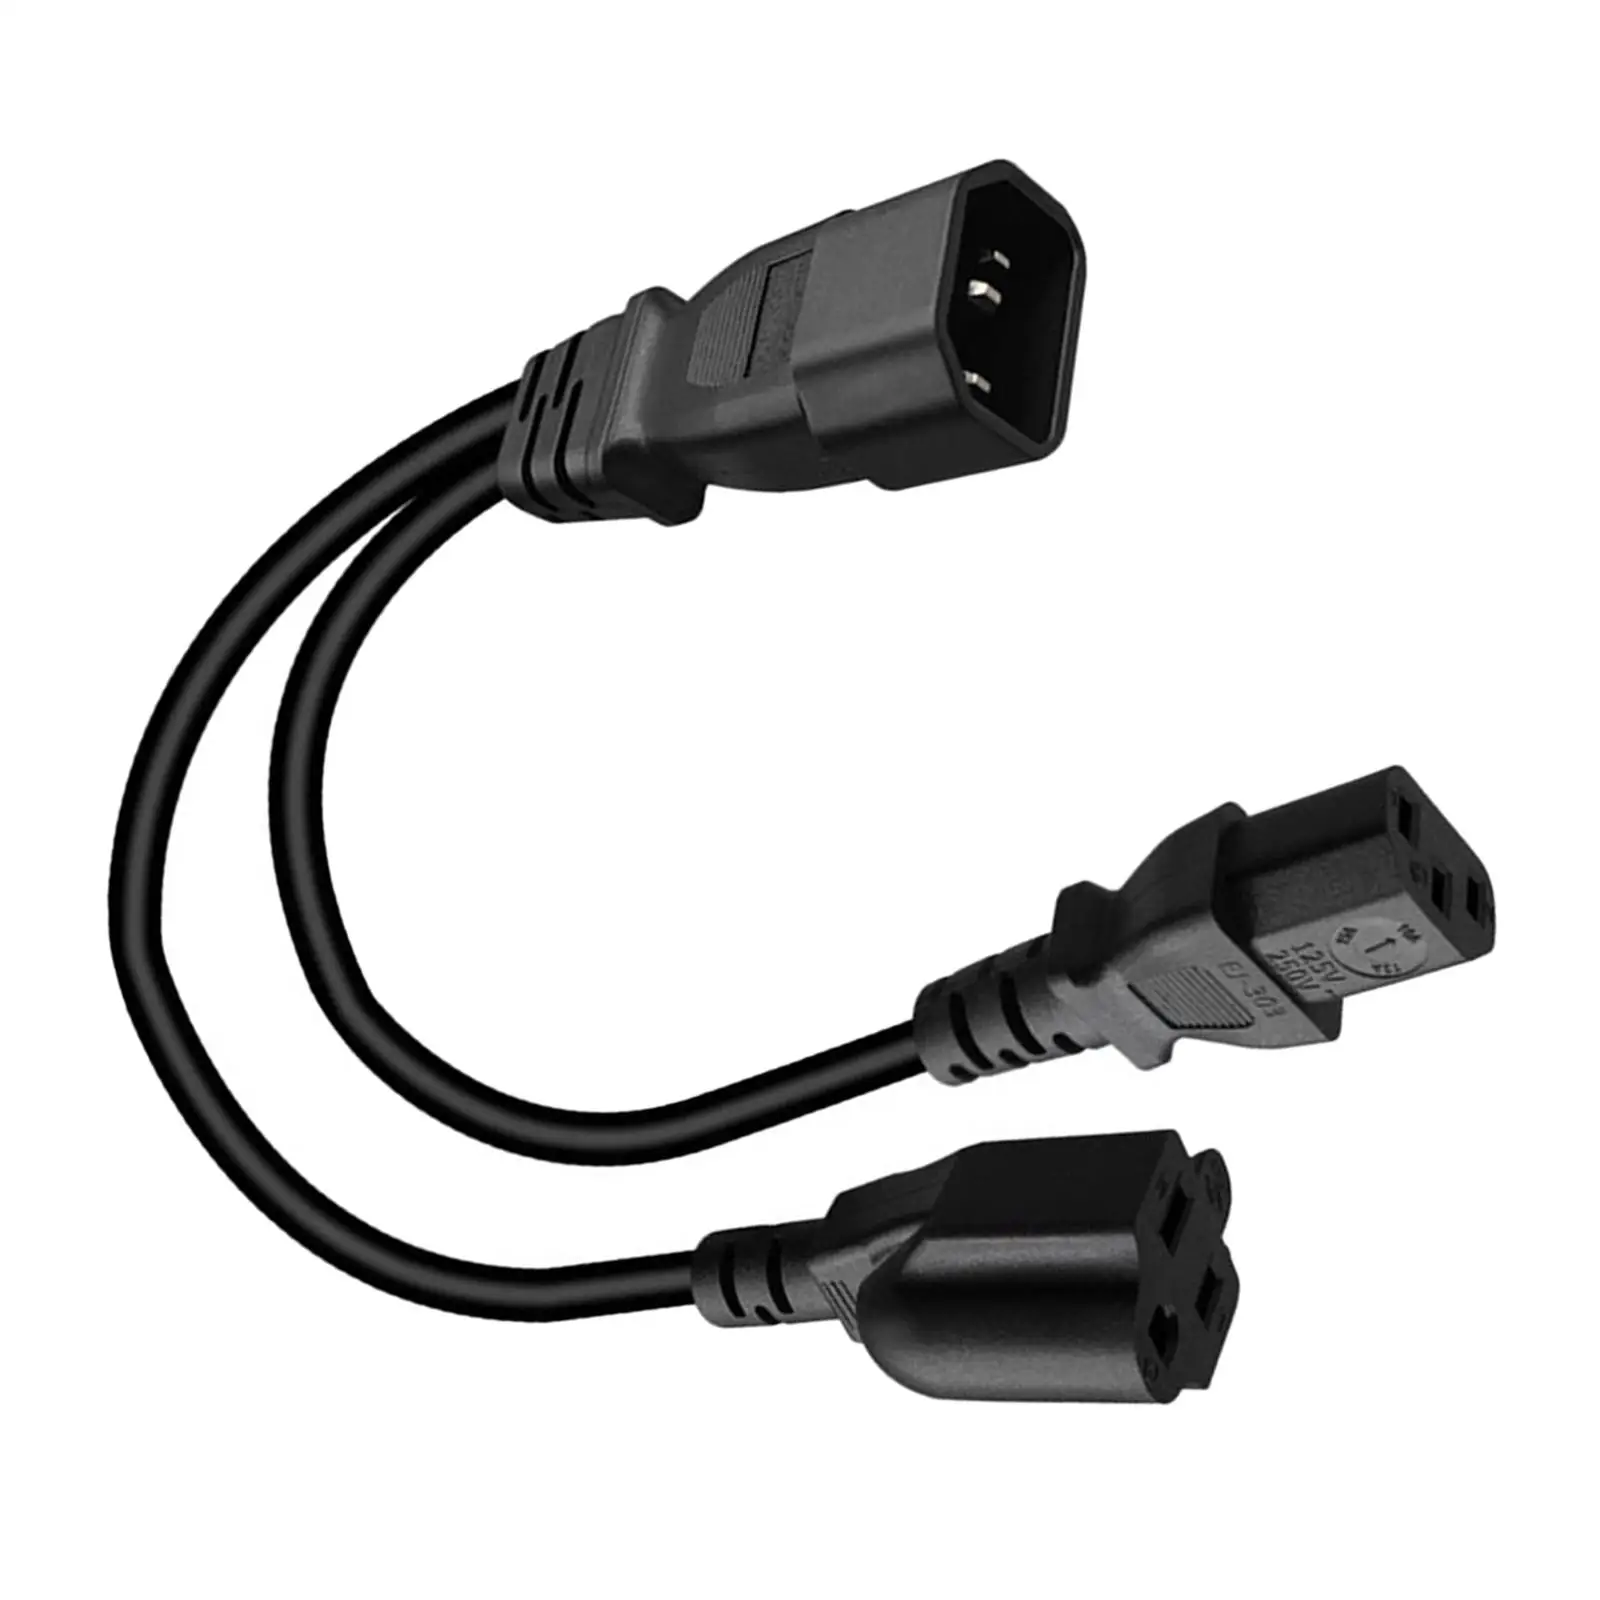 C14 to C13 and 5-15R Power Cord 1ft 3 Prong 10A 250V OFC Conductor Y Splitter Adapter Cable for Computer Laptop PC